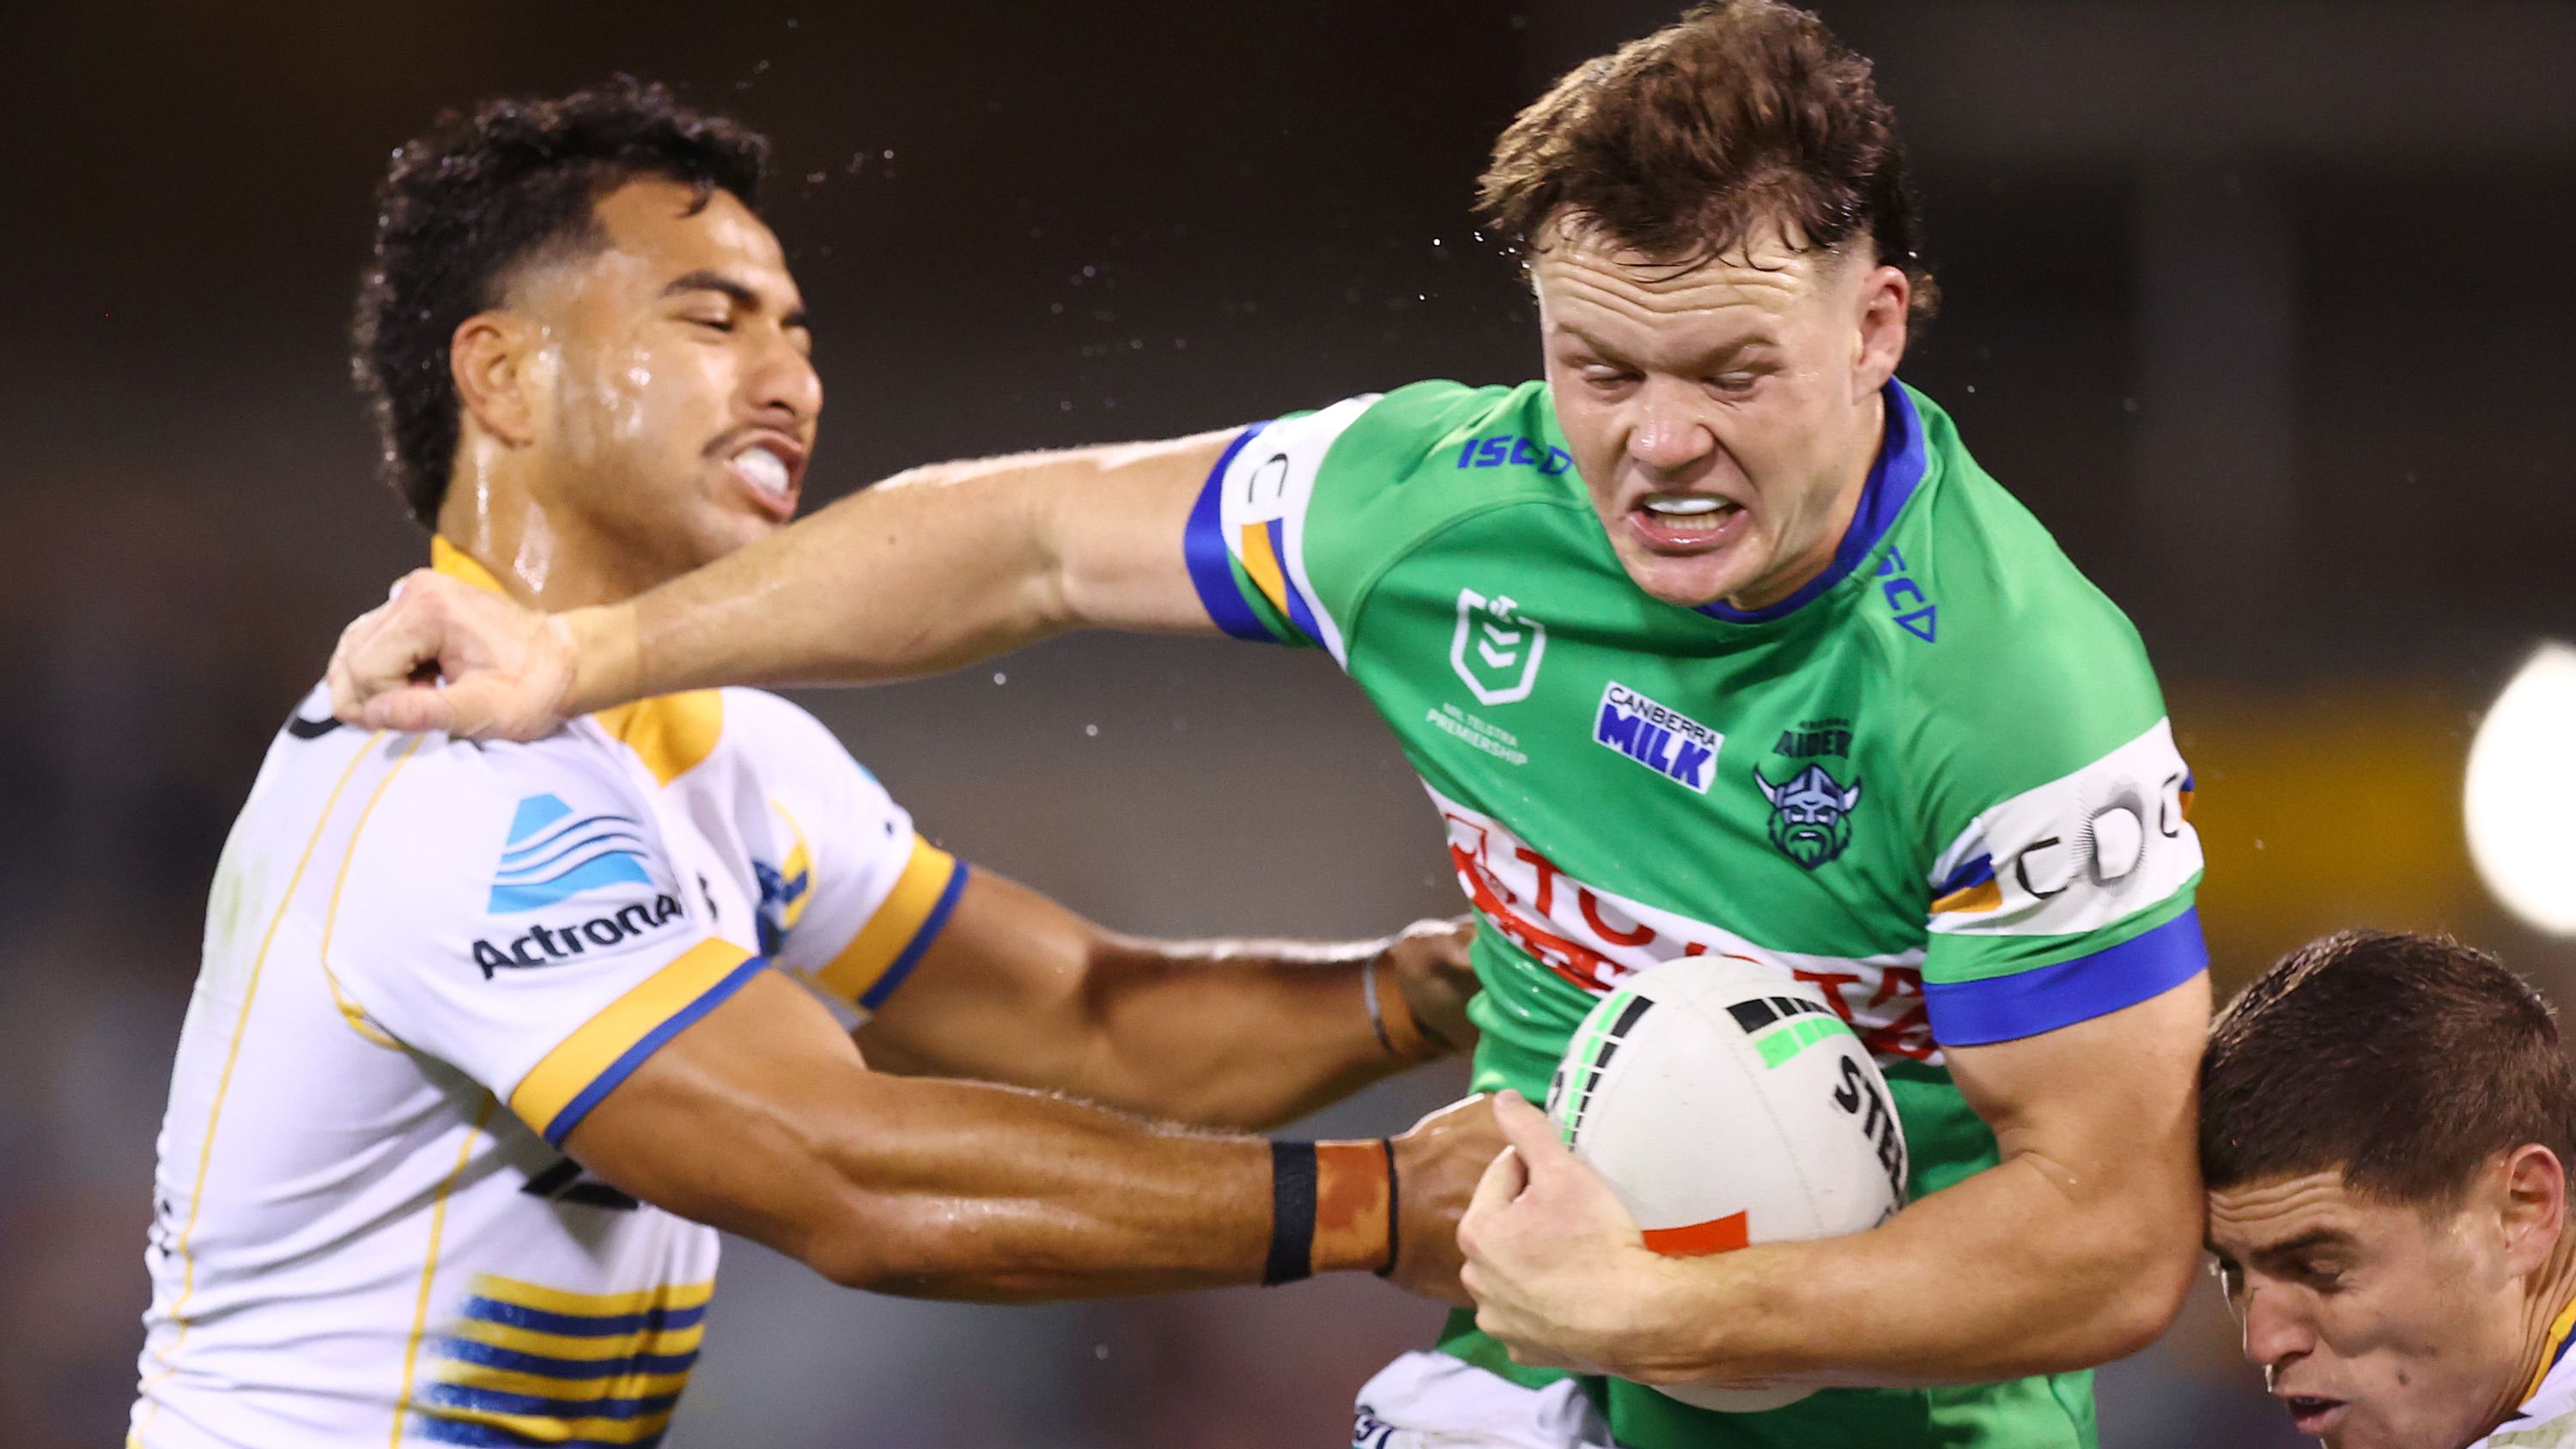 Ethan Strange of the Raiders during match between Canberra Raiders and Parramatta Eels. (Photo by Mark Nolan/Getty Images)